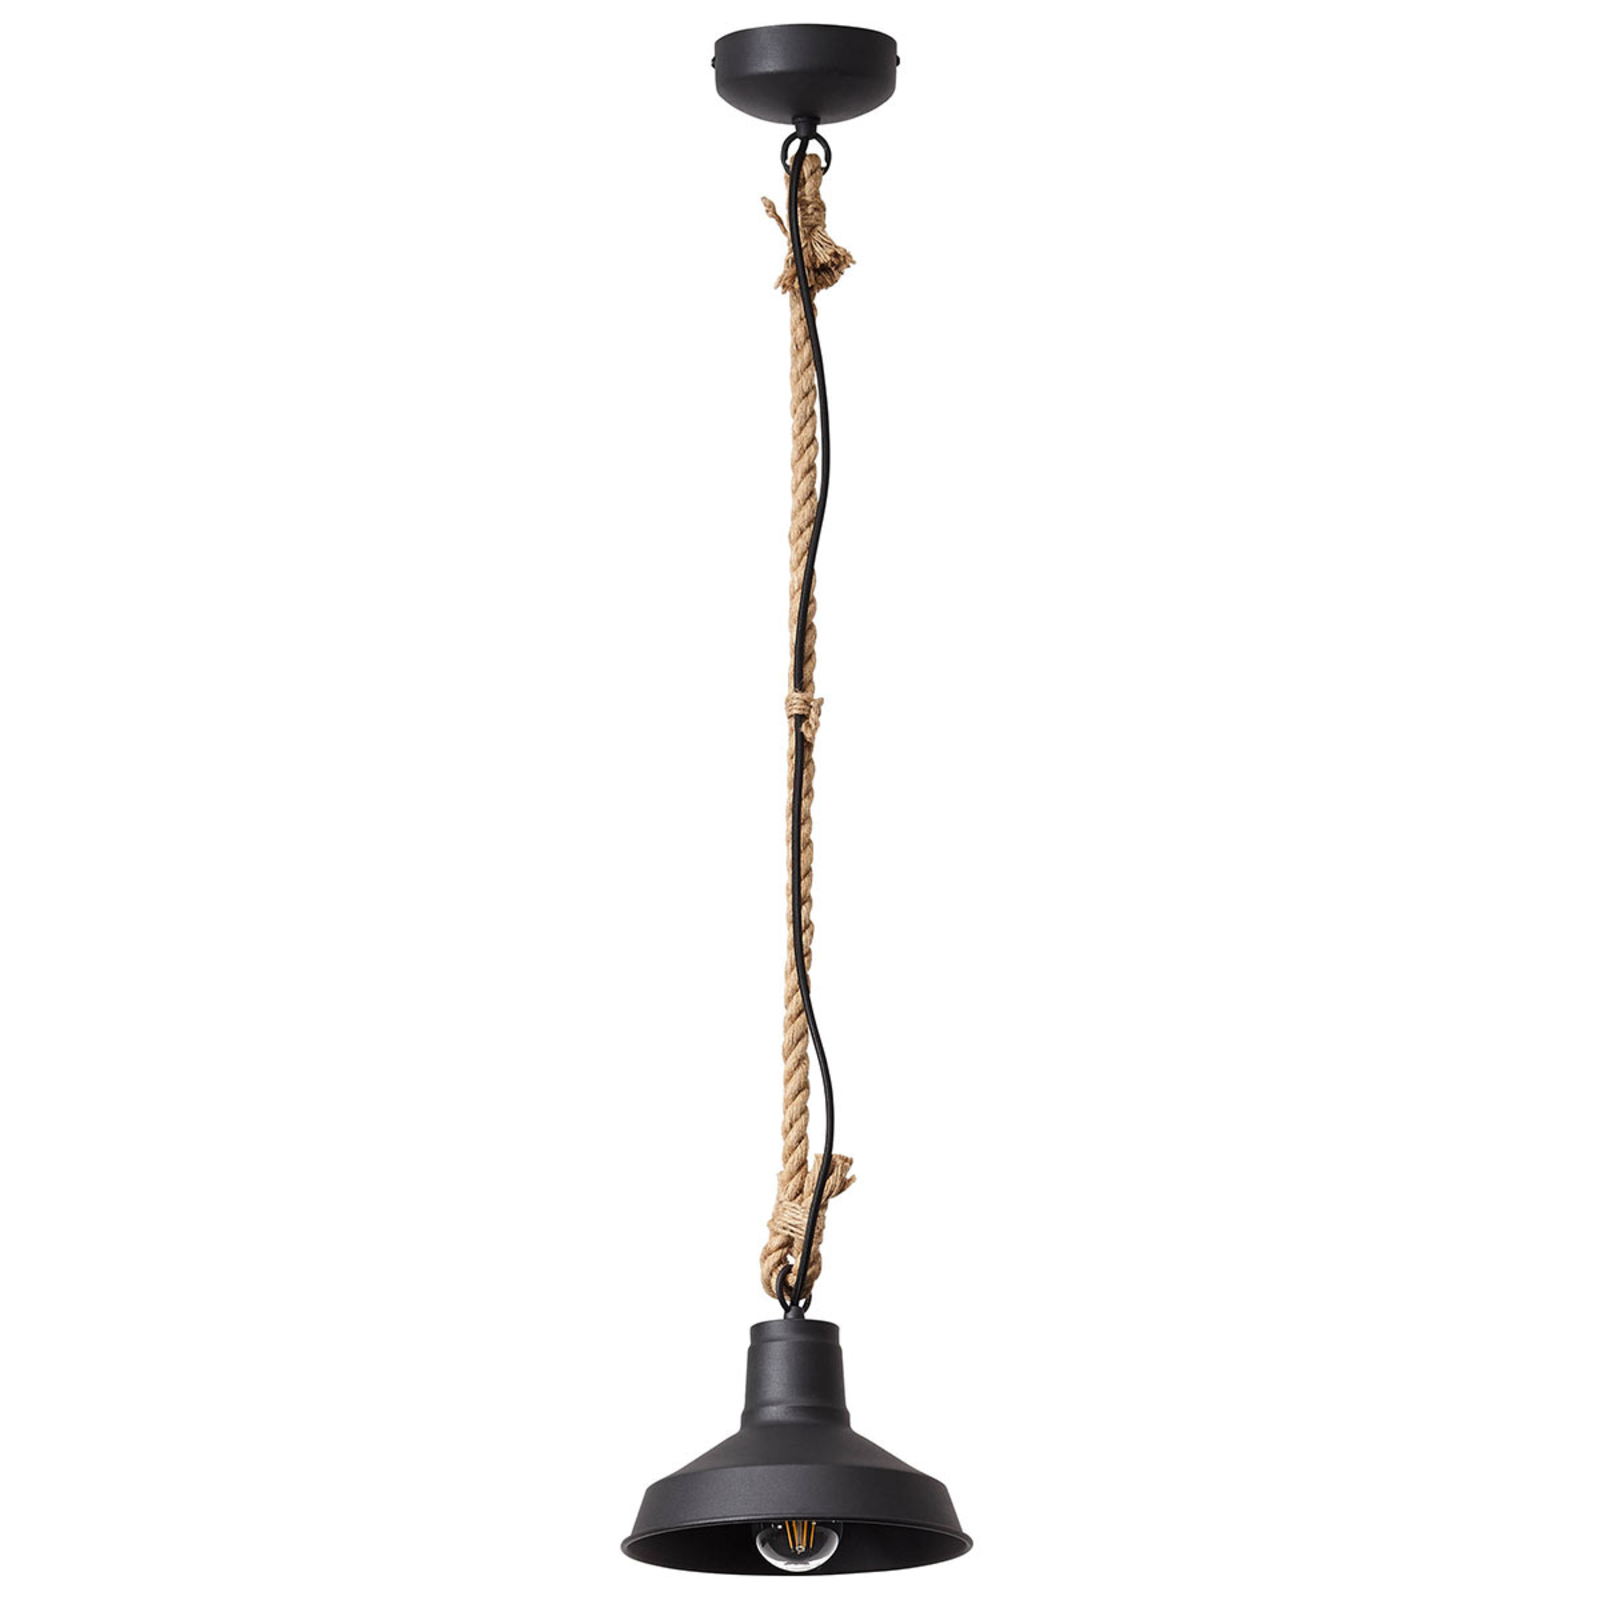 With cable suspension system - hanging lamp Hank